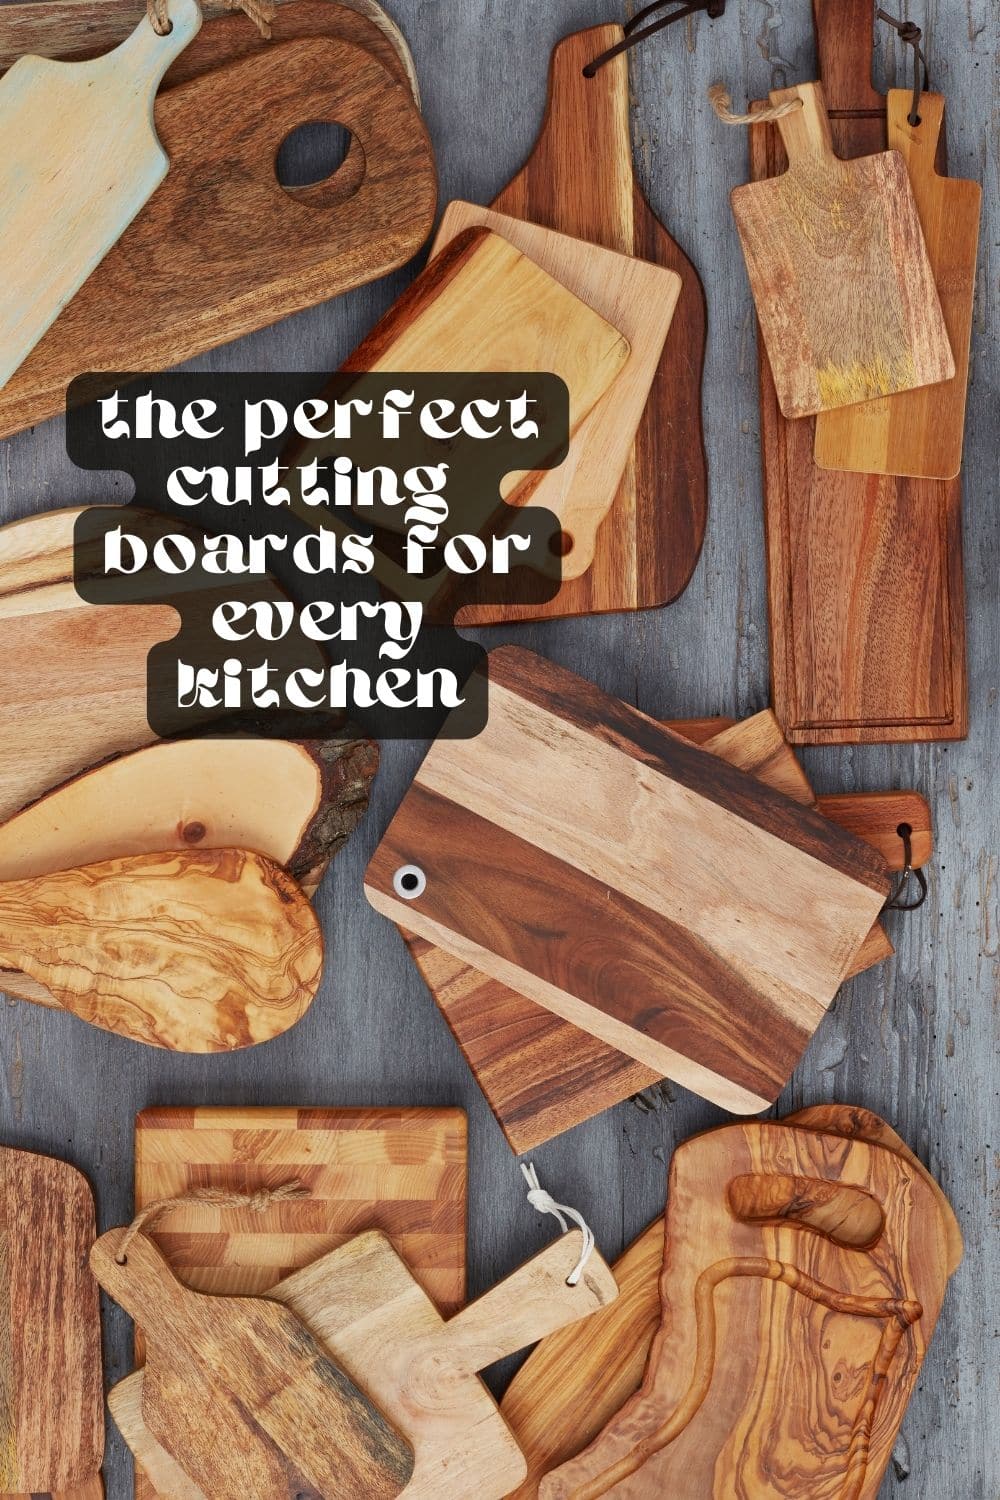 9 Best Cutting Boards: Dishwasher-Safe, Meat-Friendly, and Butcher Block  Options • Longbourn Farm